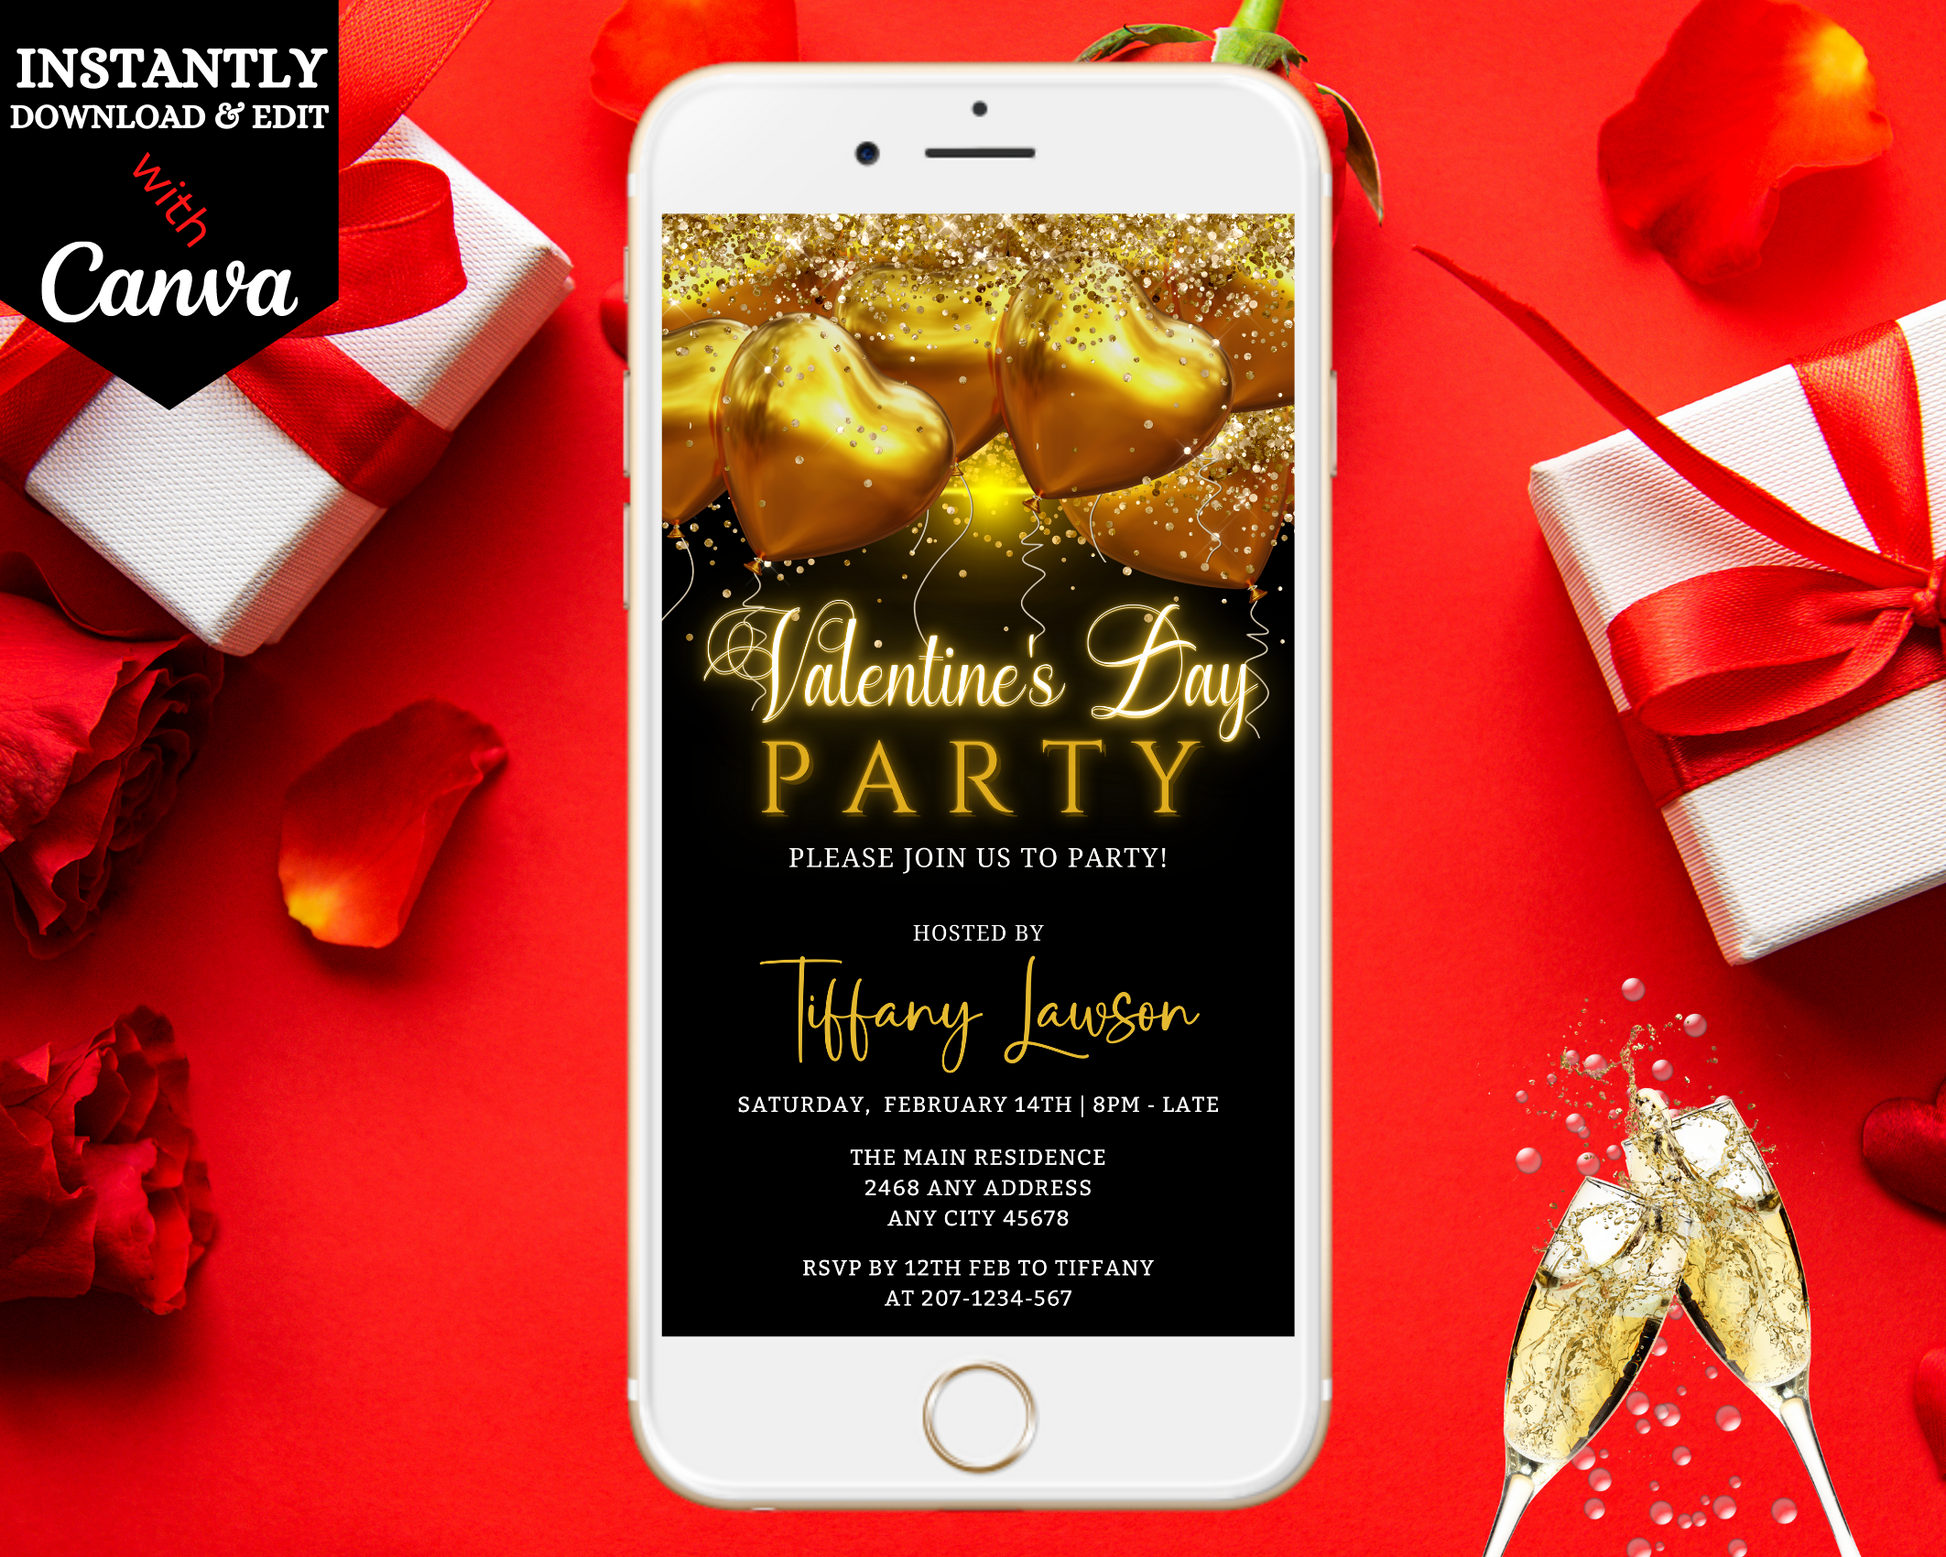 Neon Golden Heart Balloons | Valentines Party Evite displayed on a smartphone, featuring champagne glasses, a gift box, and gold balloons. Editable in Canva for digital invitations.